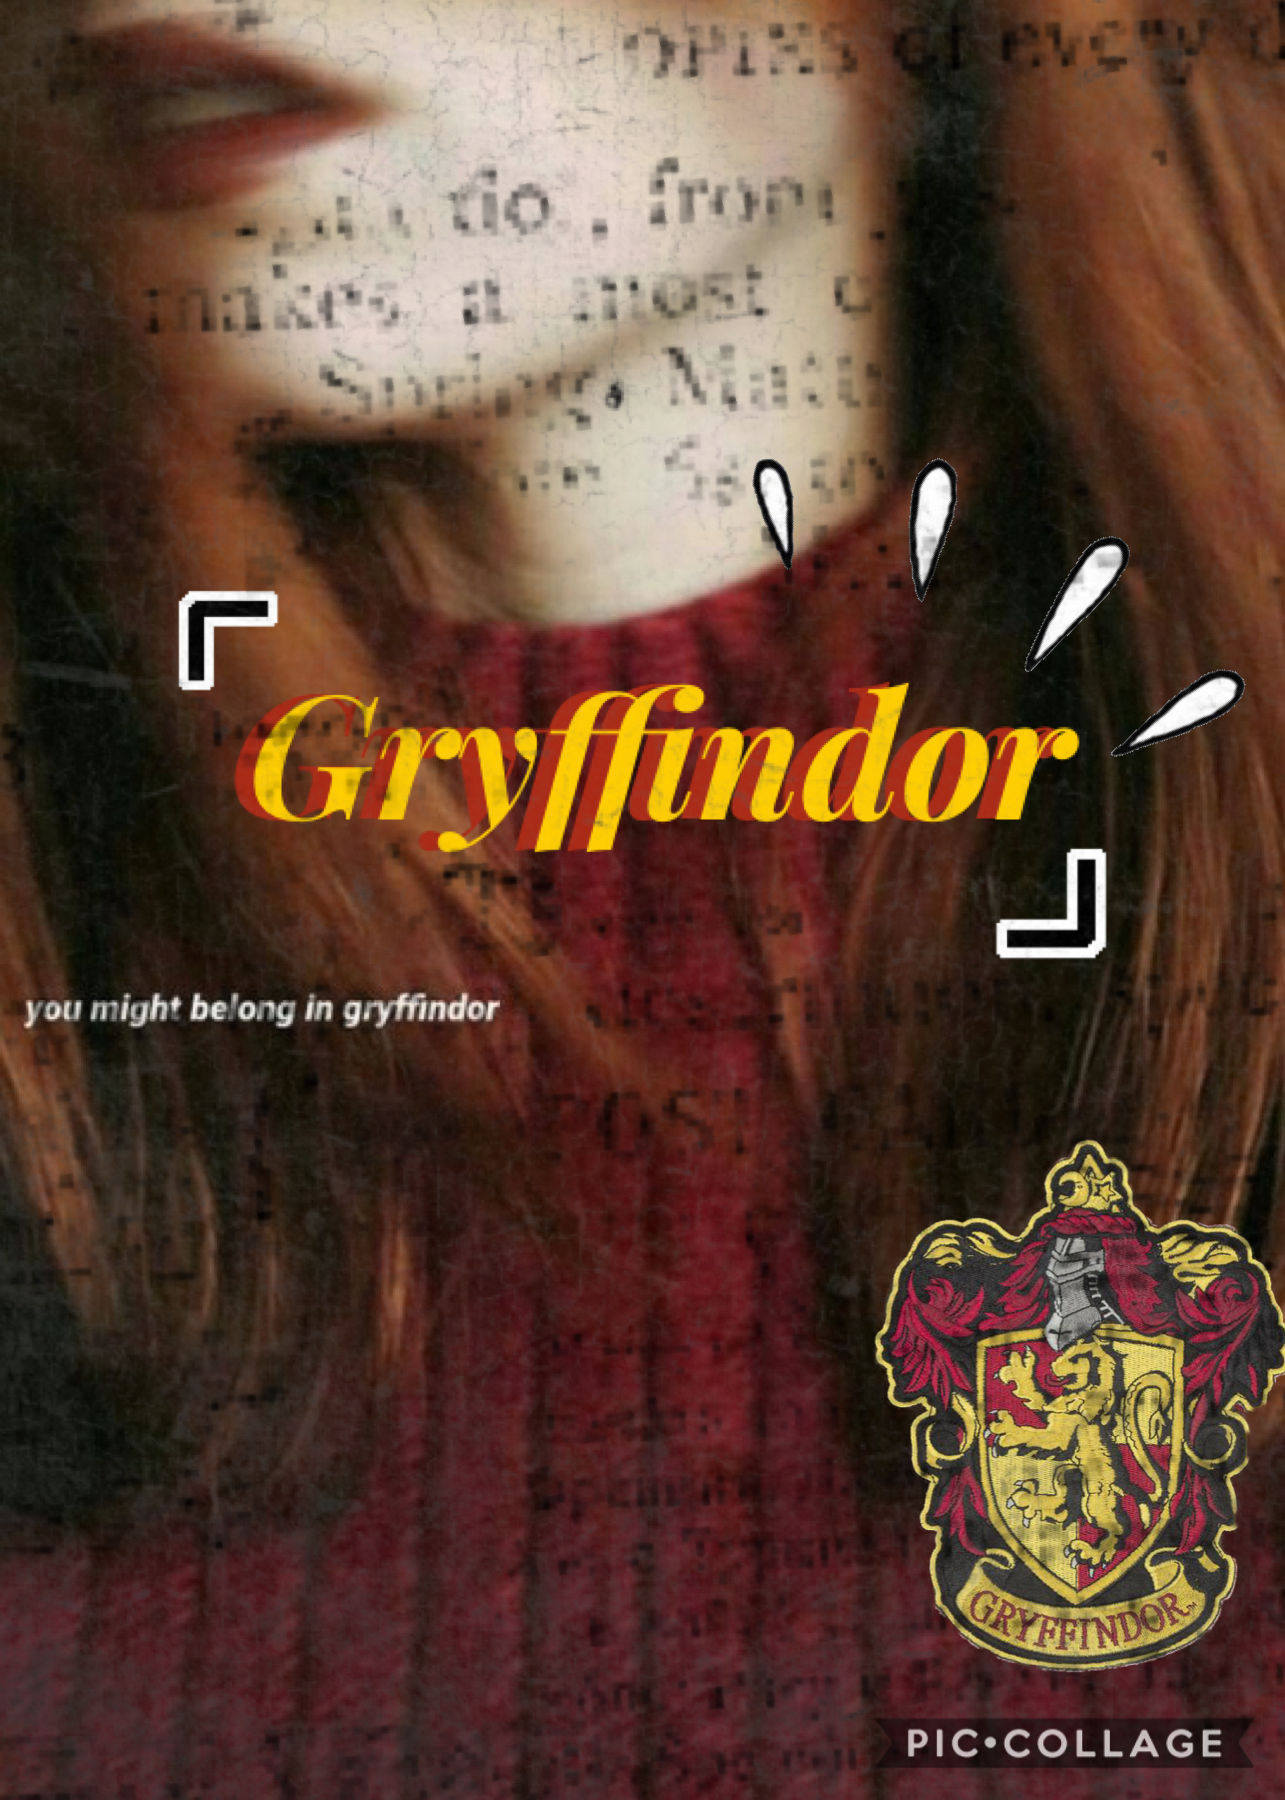 I haven’t posted in like a million years but here’s a Gryffindor aesthetic ❤️💛Comment what house I should do next!